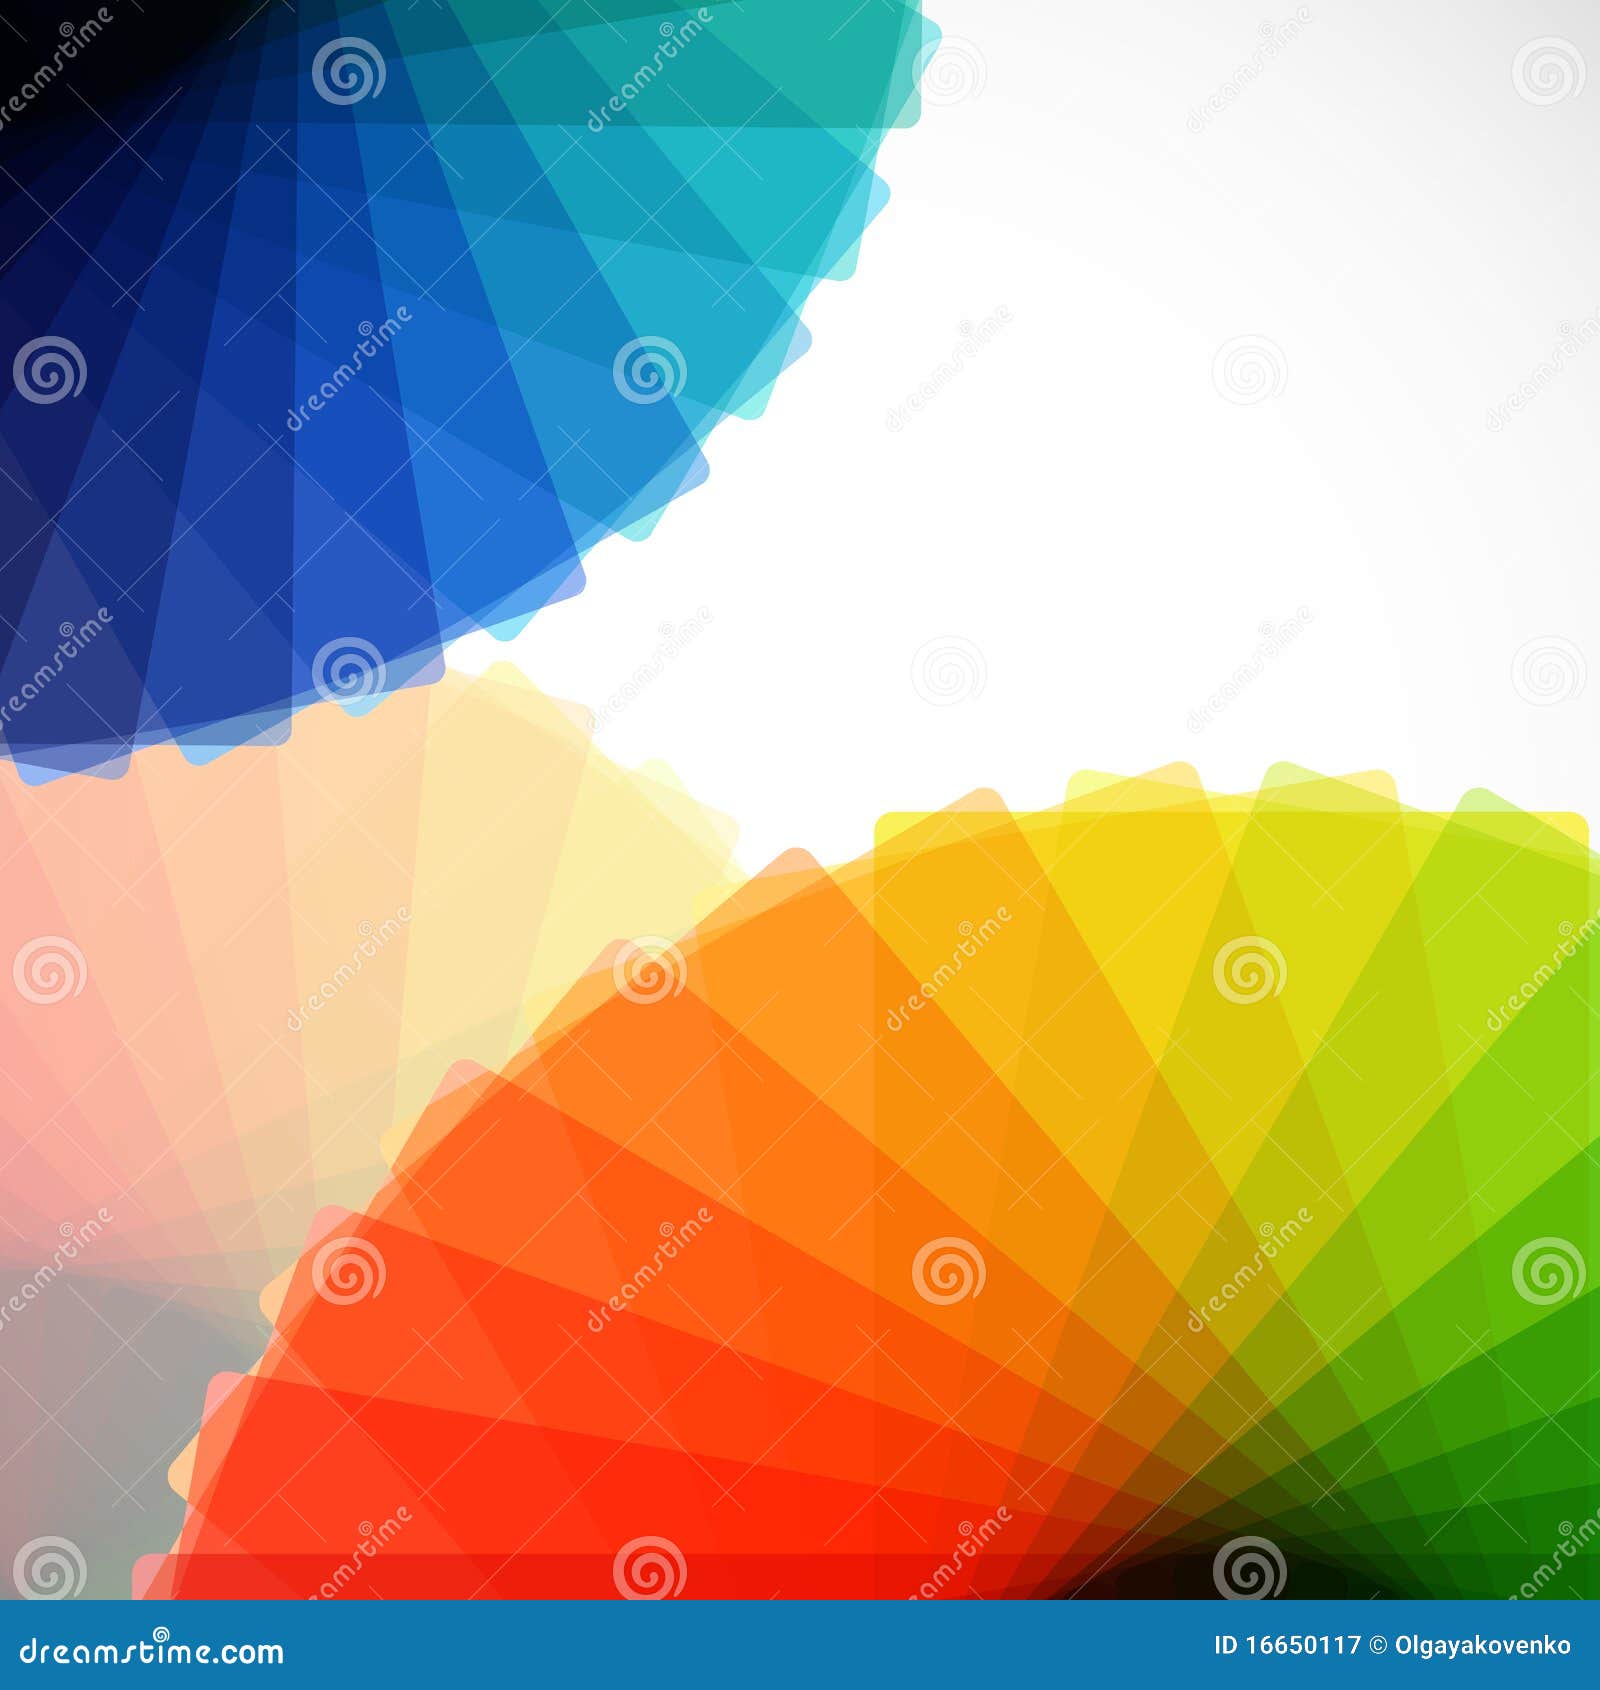 abstract gamut backgrounds.